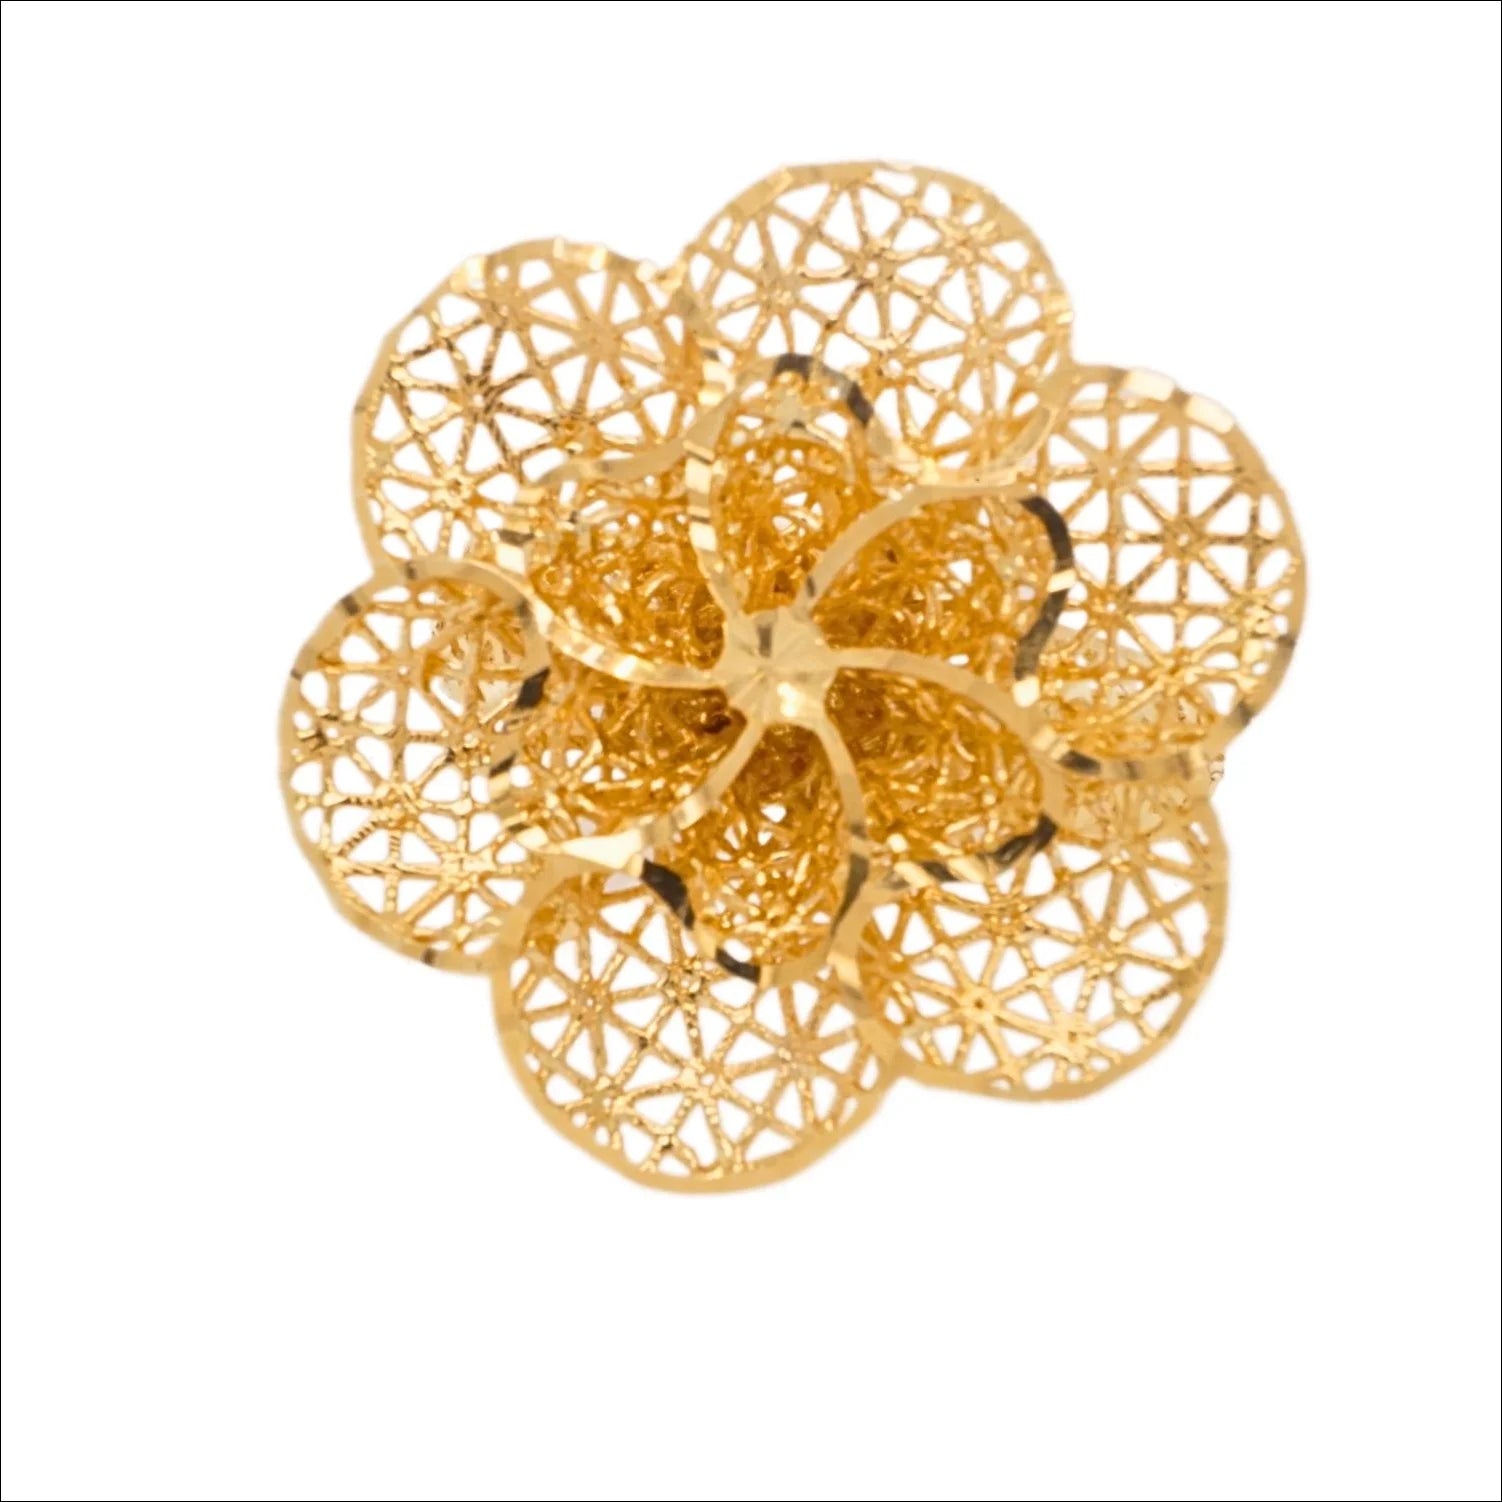 Blossom in Gold: The 18k Flower Ring | Above $1000